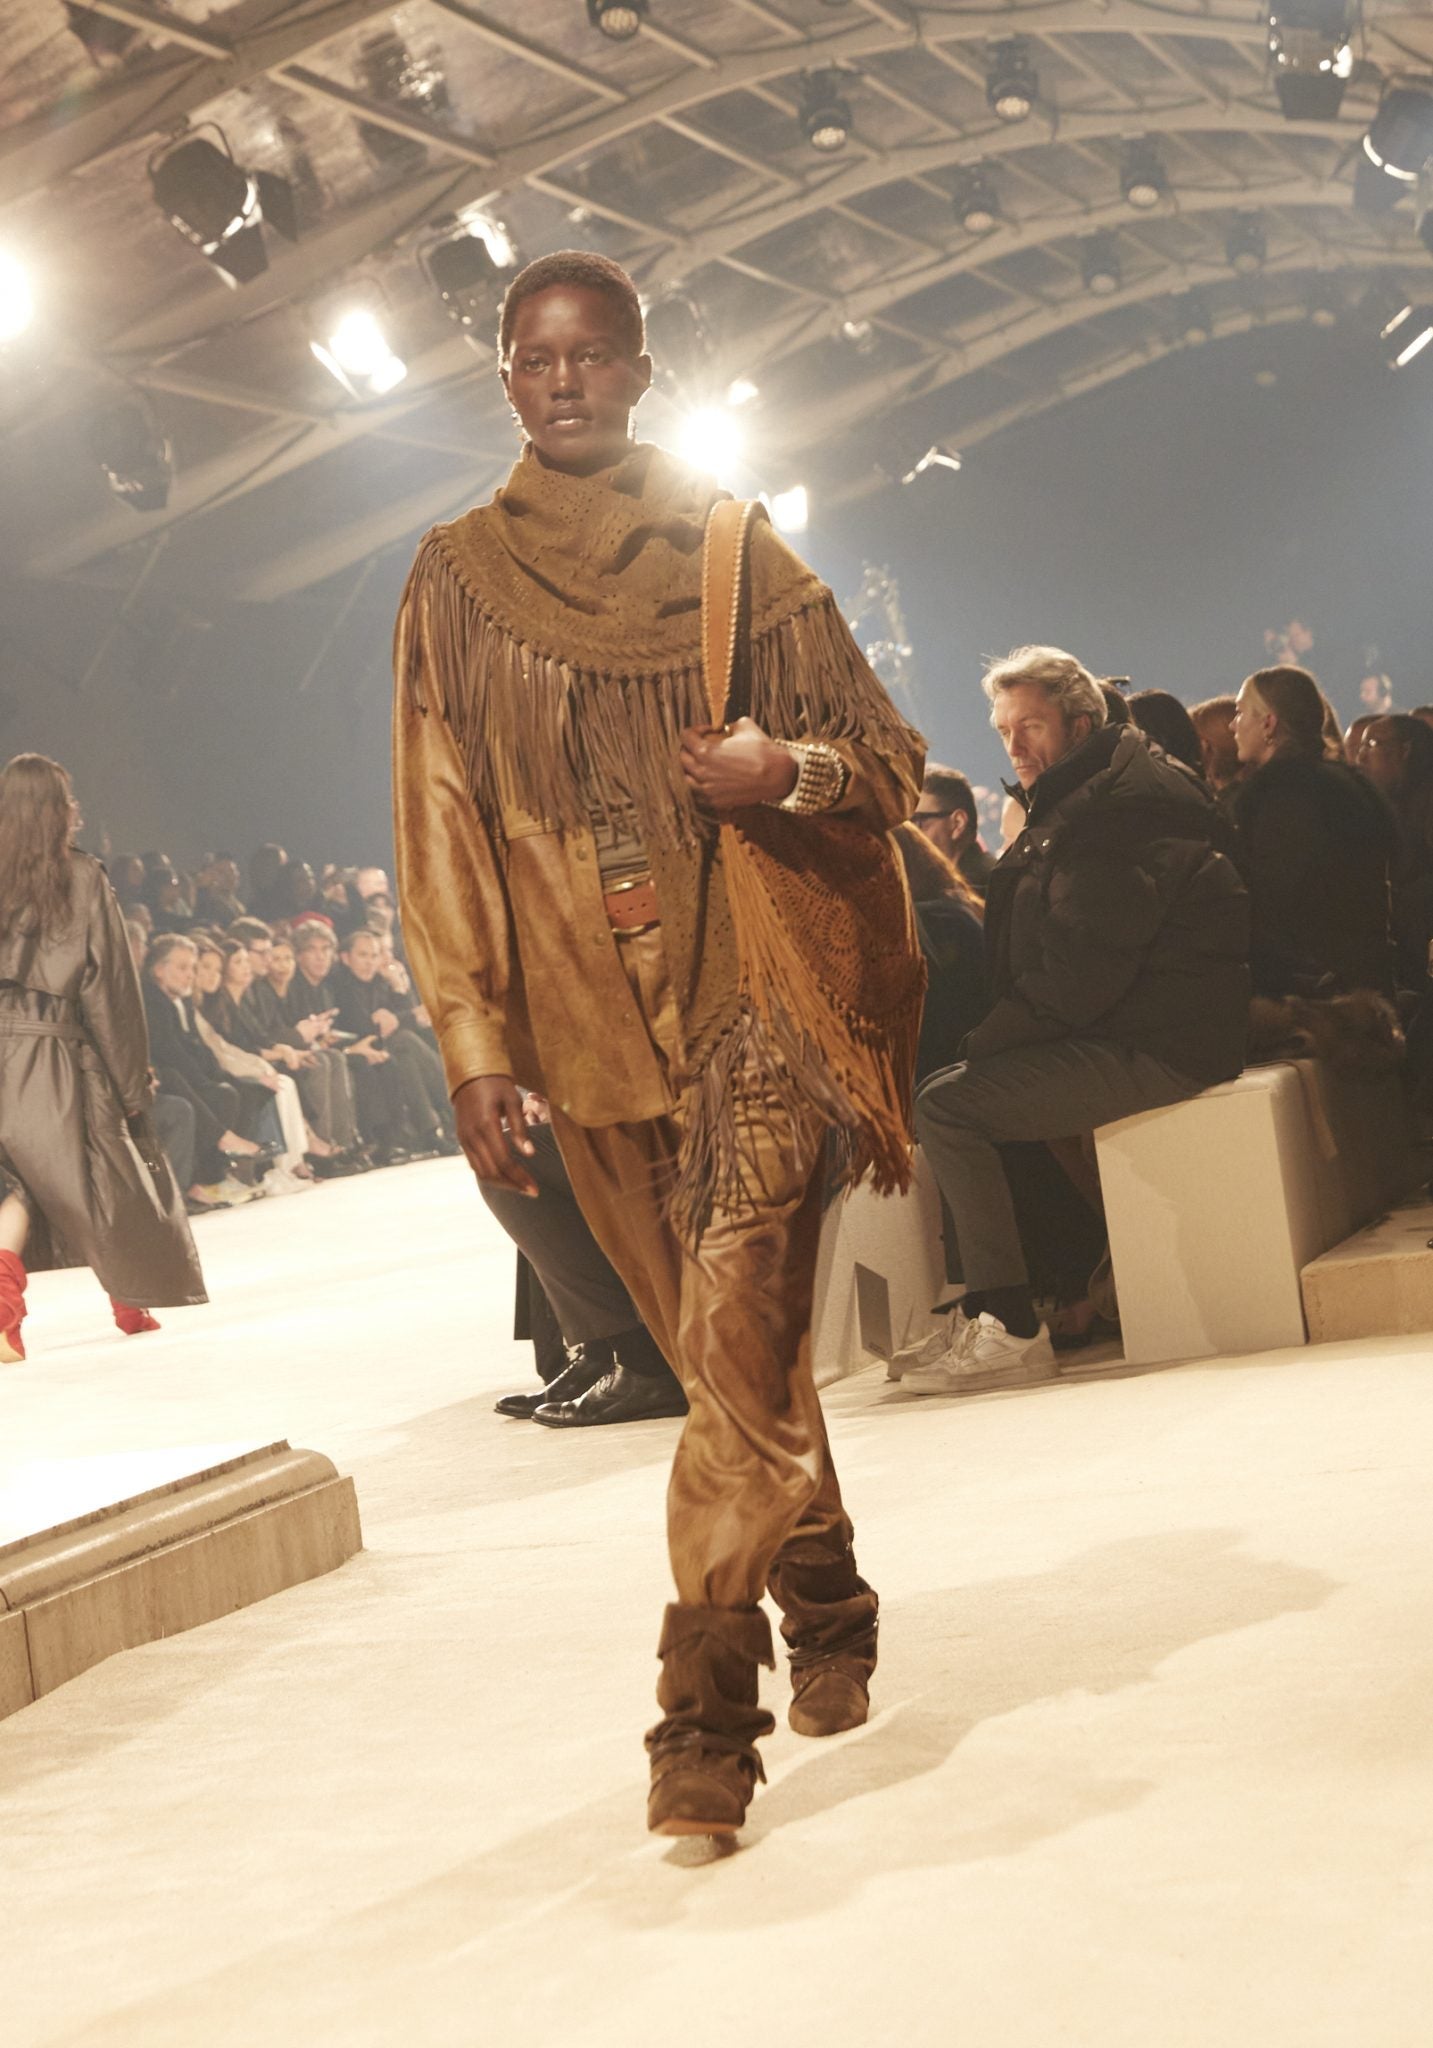 Female model on catwalk wearing a fringed scarf, overshirt and pants tucked into boots, carrying a large fringed bag, all in various browns.